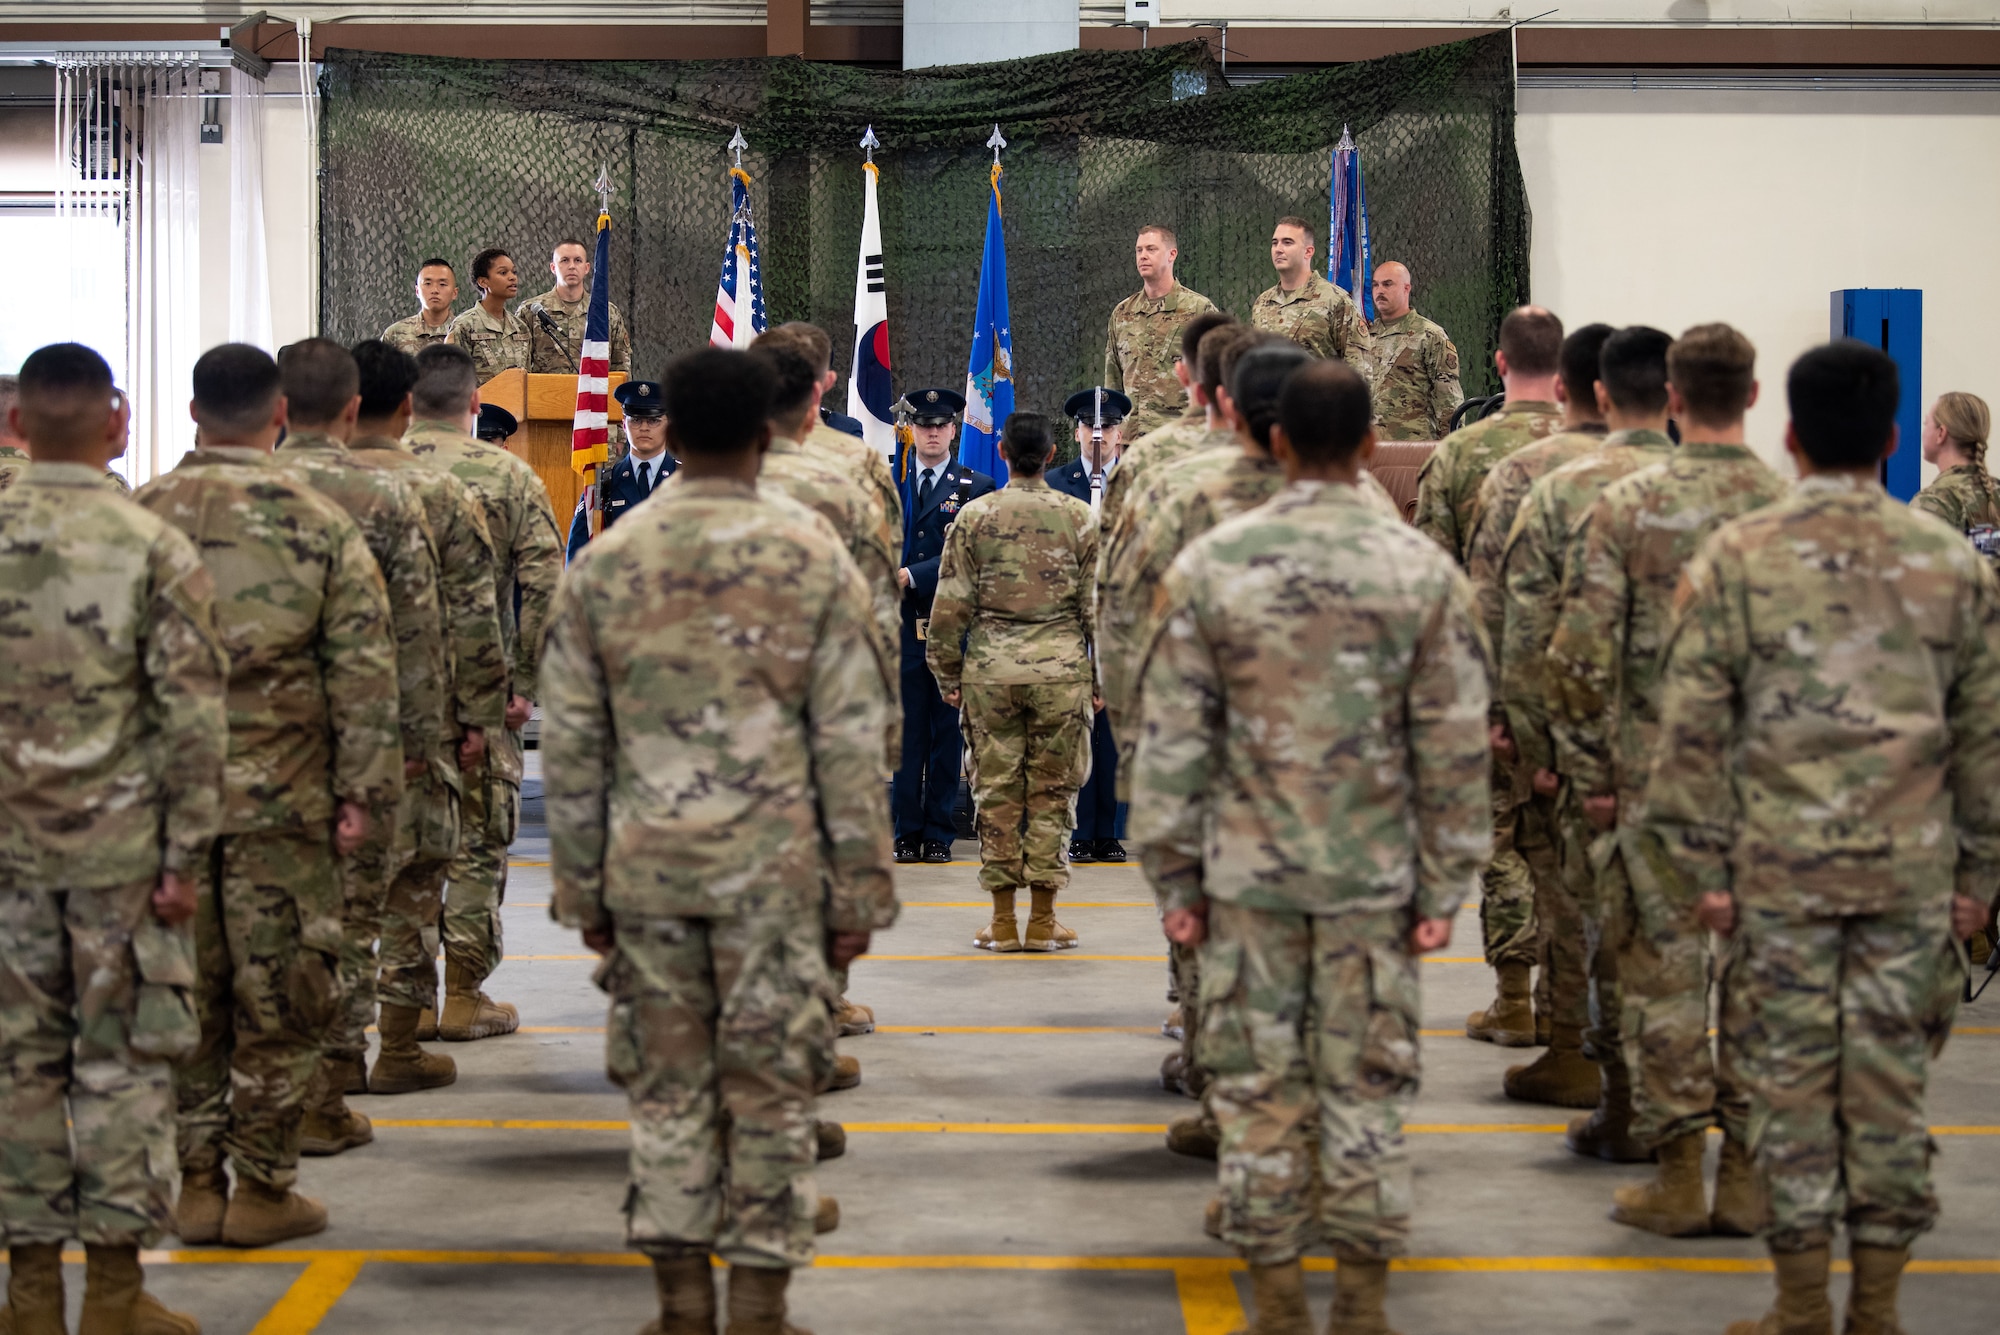 Airmen assigned to the 51st Logistics Readiness Squadron, stand at attention for the playing of the National Anthem during the squadron’s assumption of command at Osan Air Base, Republic of Korea, July 22, 2022.